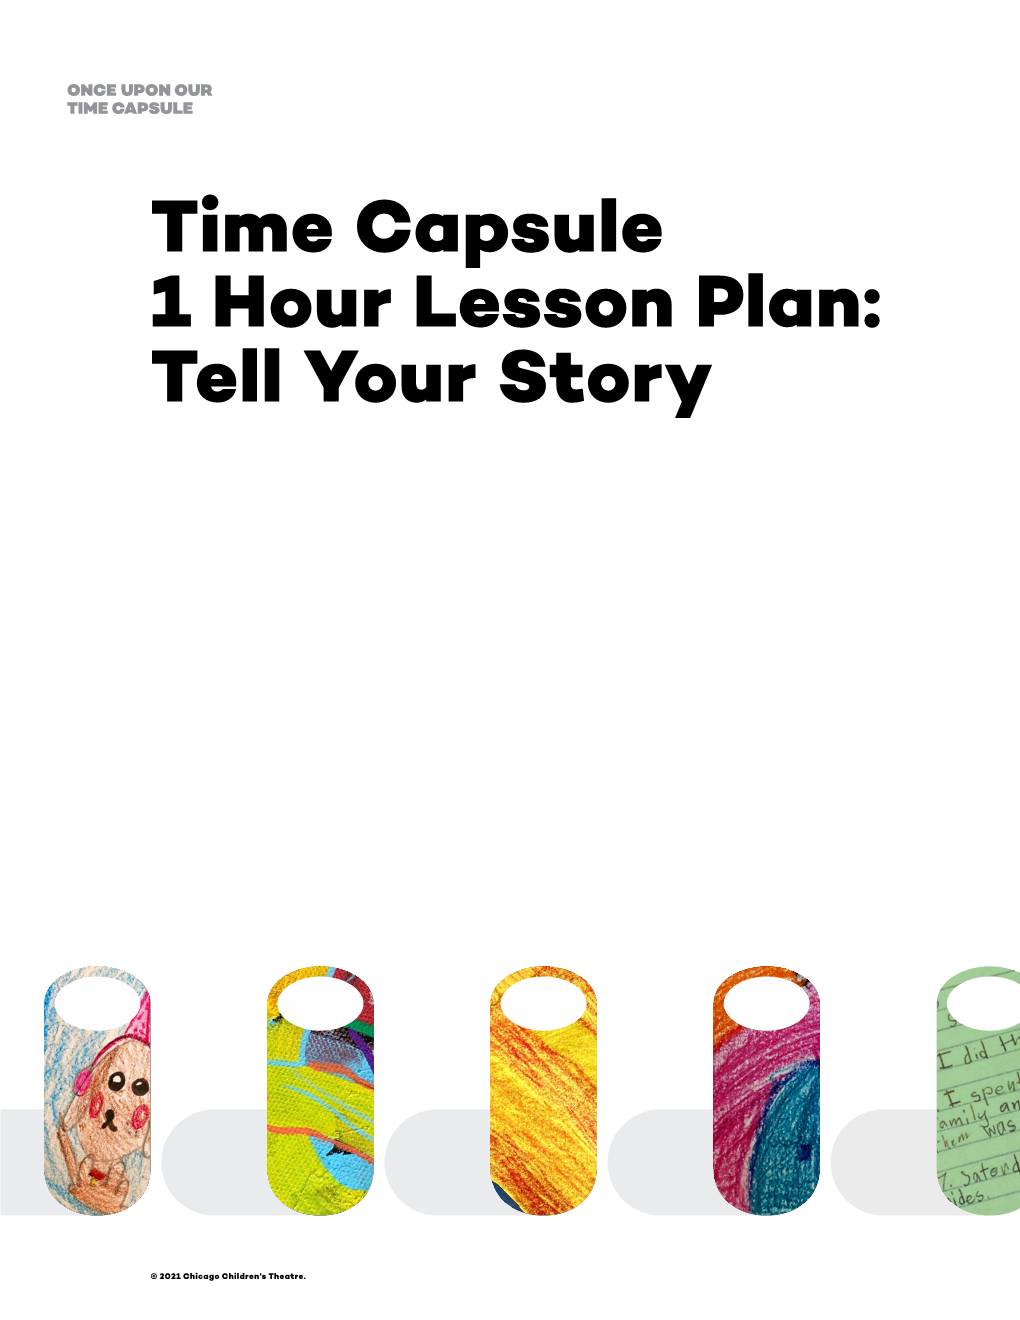 Time Capsule 1 Hour Lesson Plan: Tell Your Story